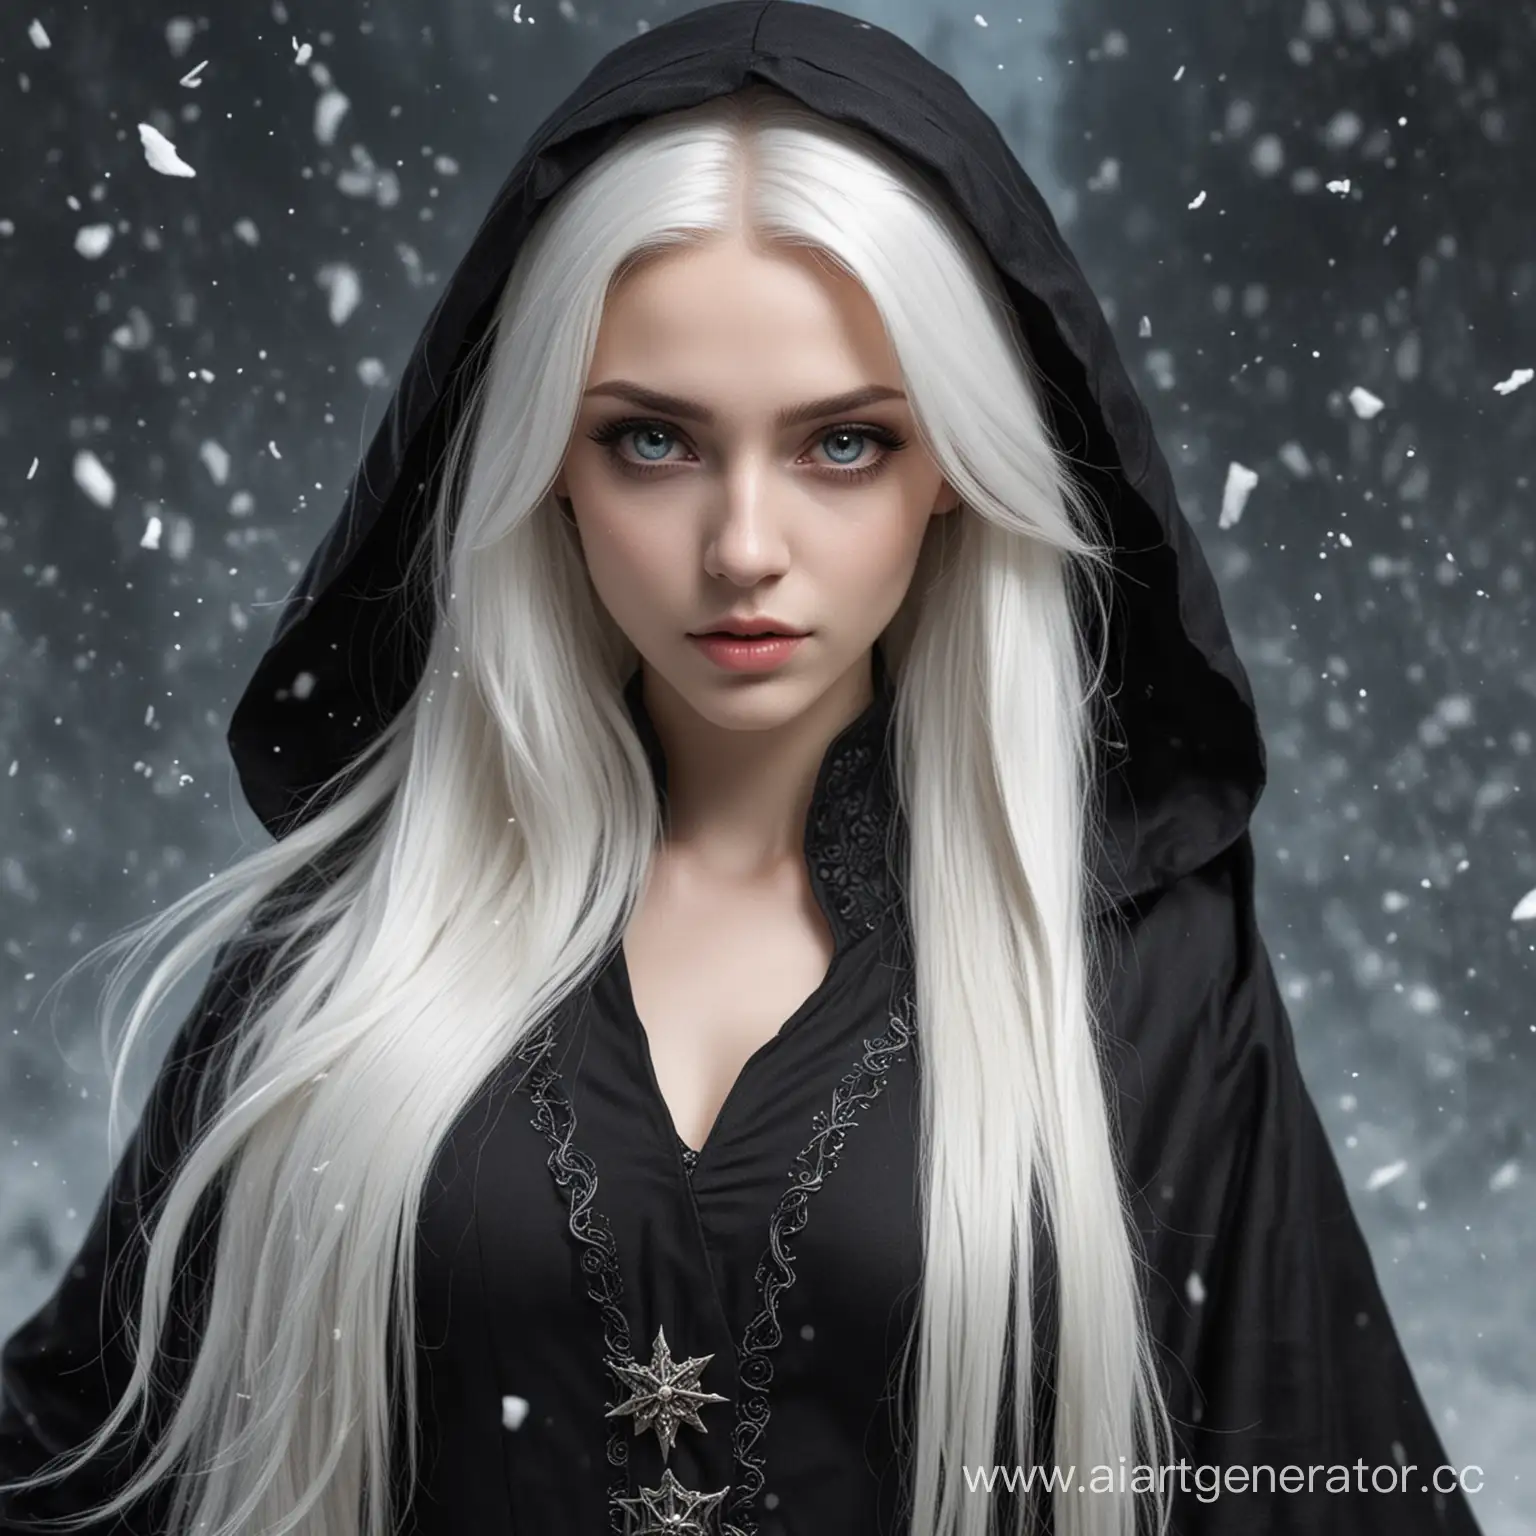 Aasimar-Girl-Sorceress-Enigmatic-Figure-in-Black-Attire-with-SnowWhite-Hair